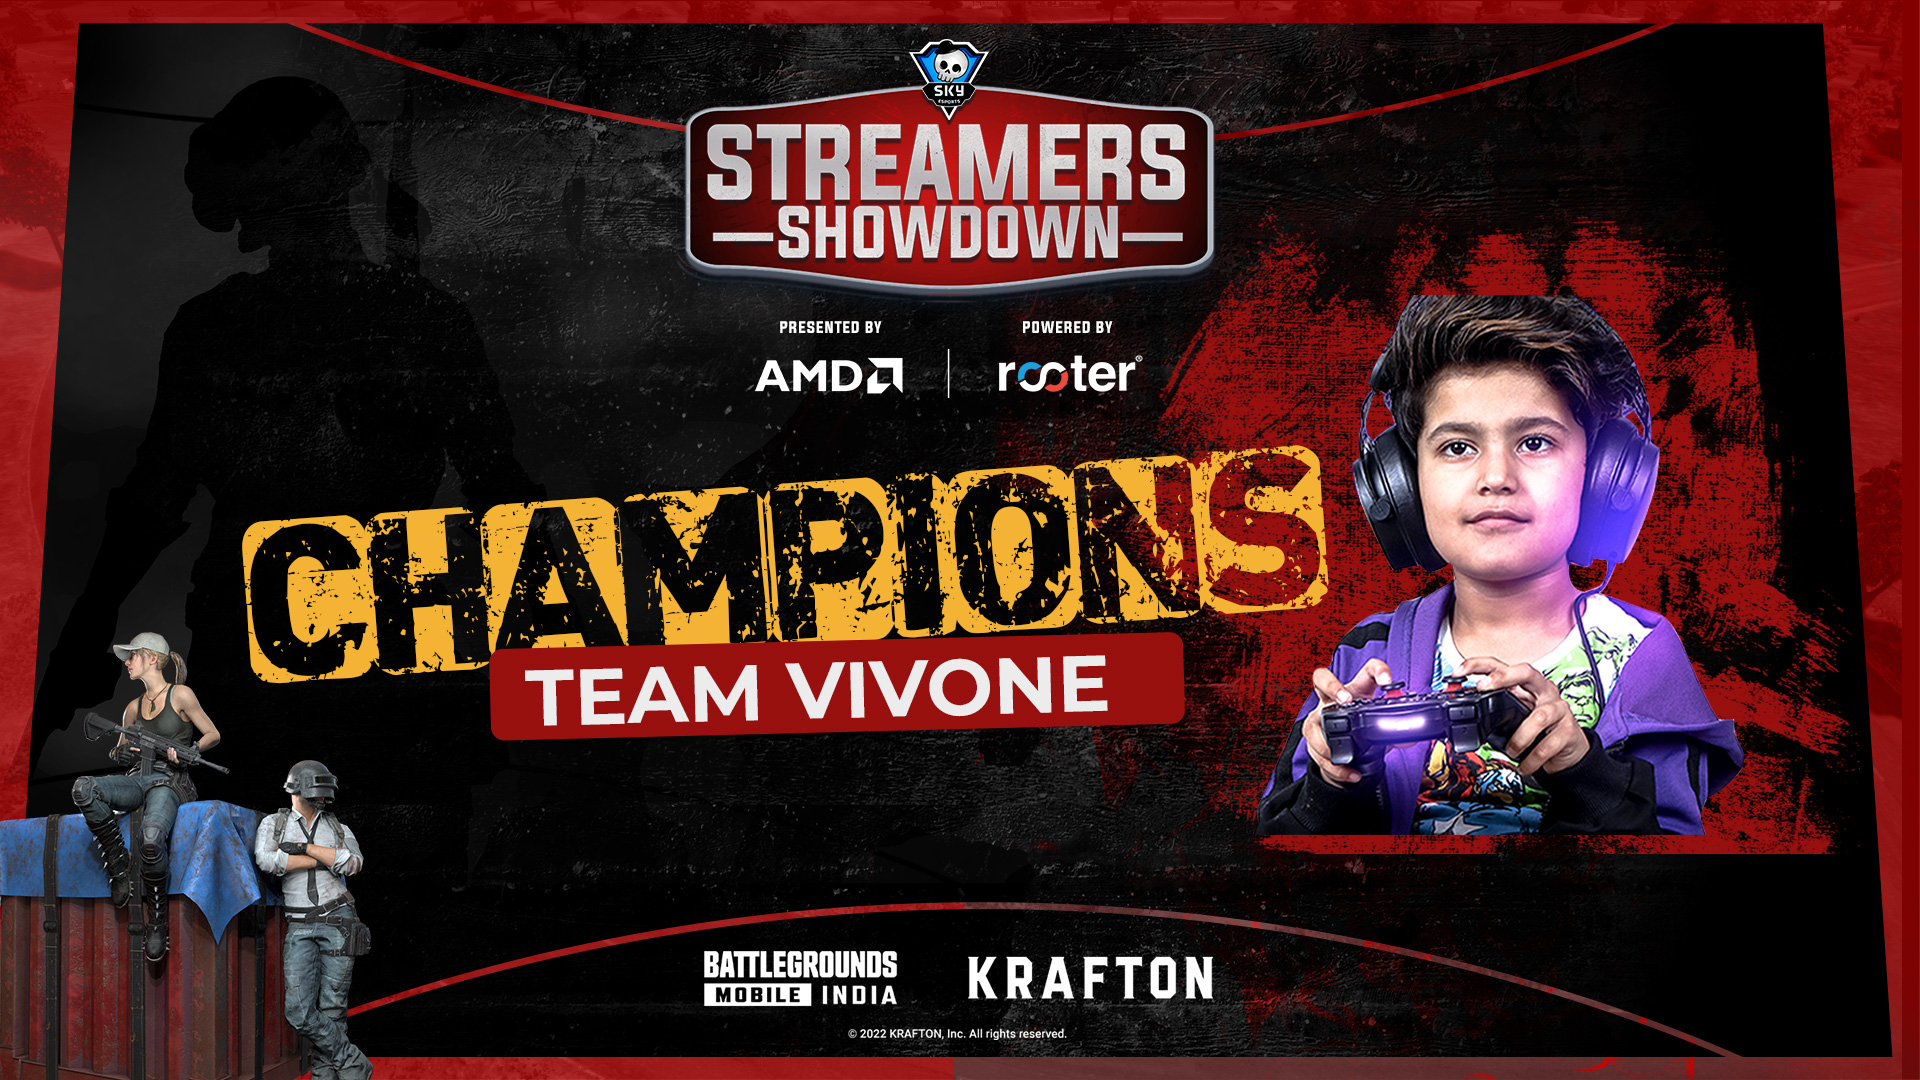 7-year-old VivOne and team crowned BGMI champions of the Skyesports Streamers Showdown